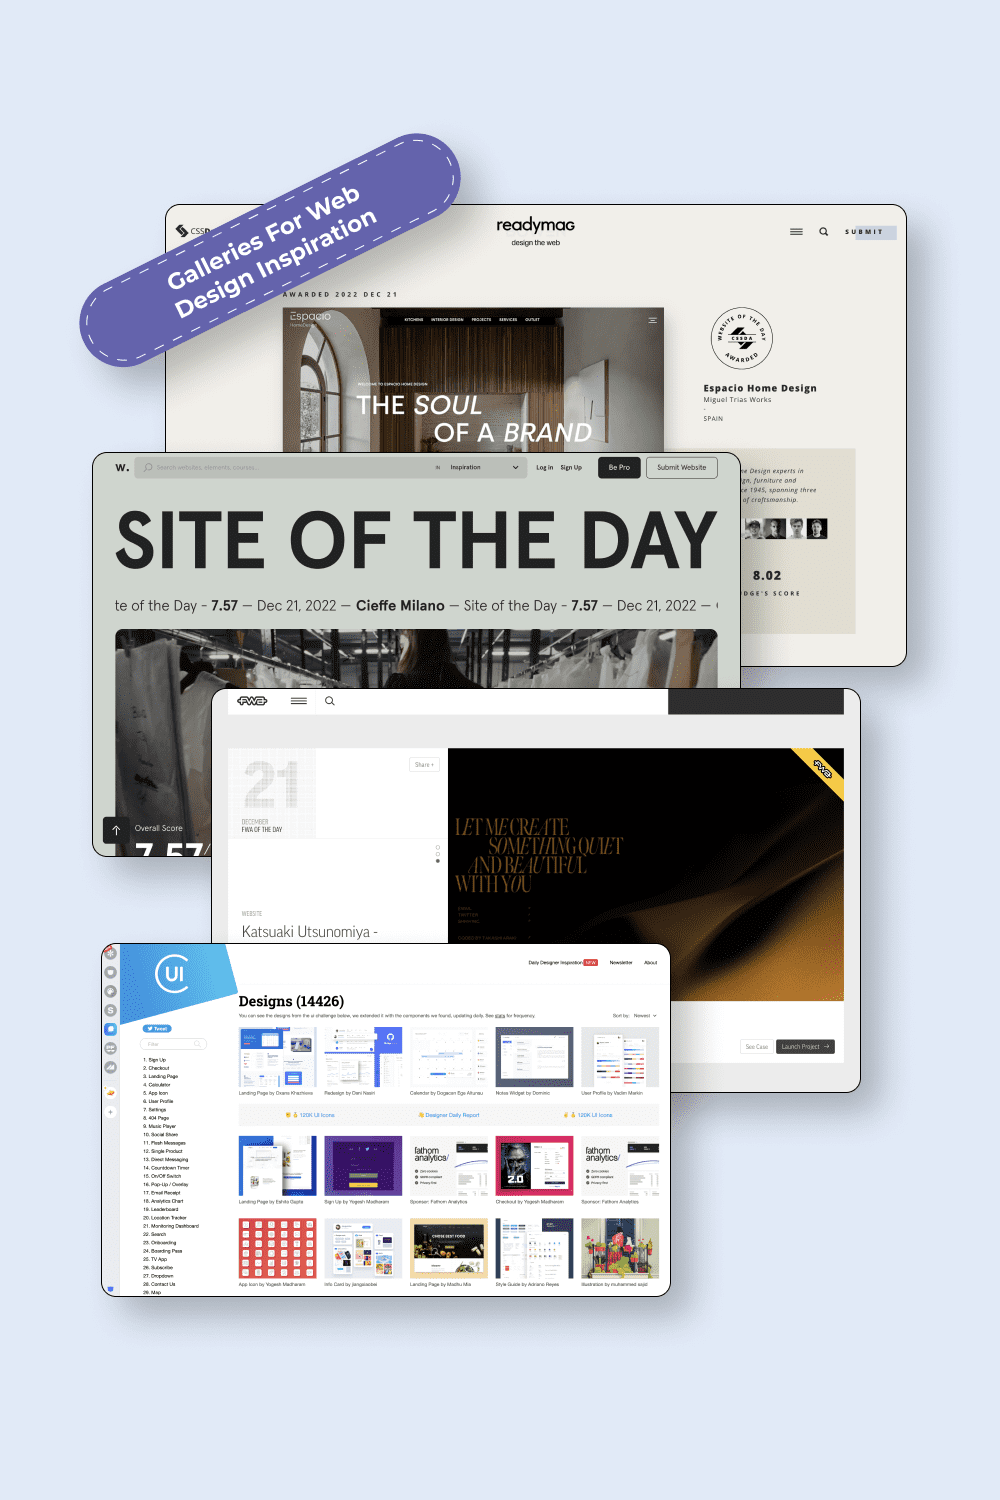 Collage with screenshots of the websites with design ideas.